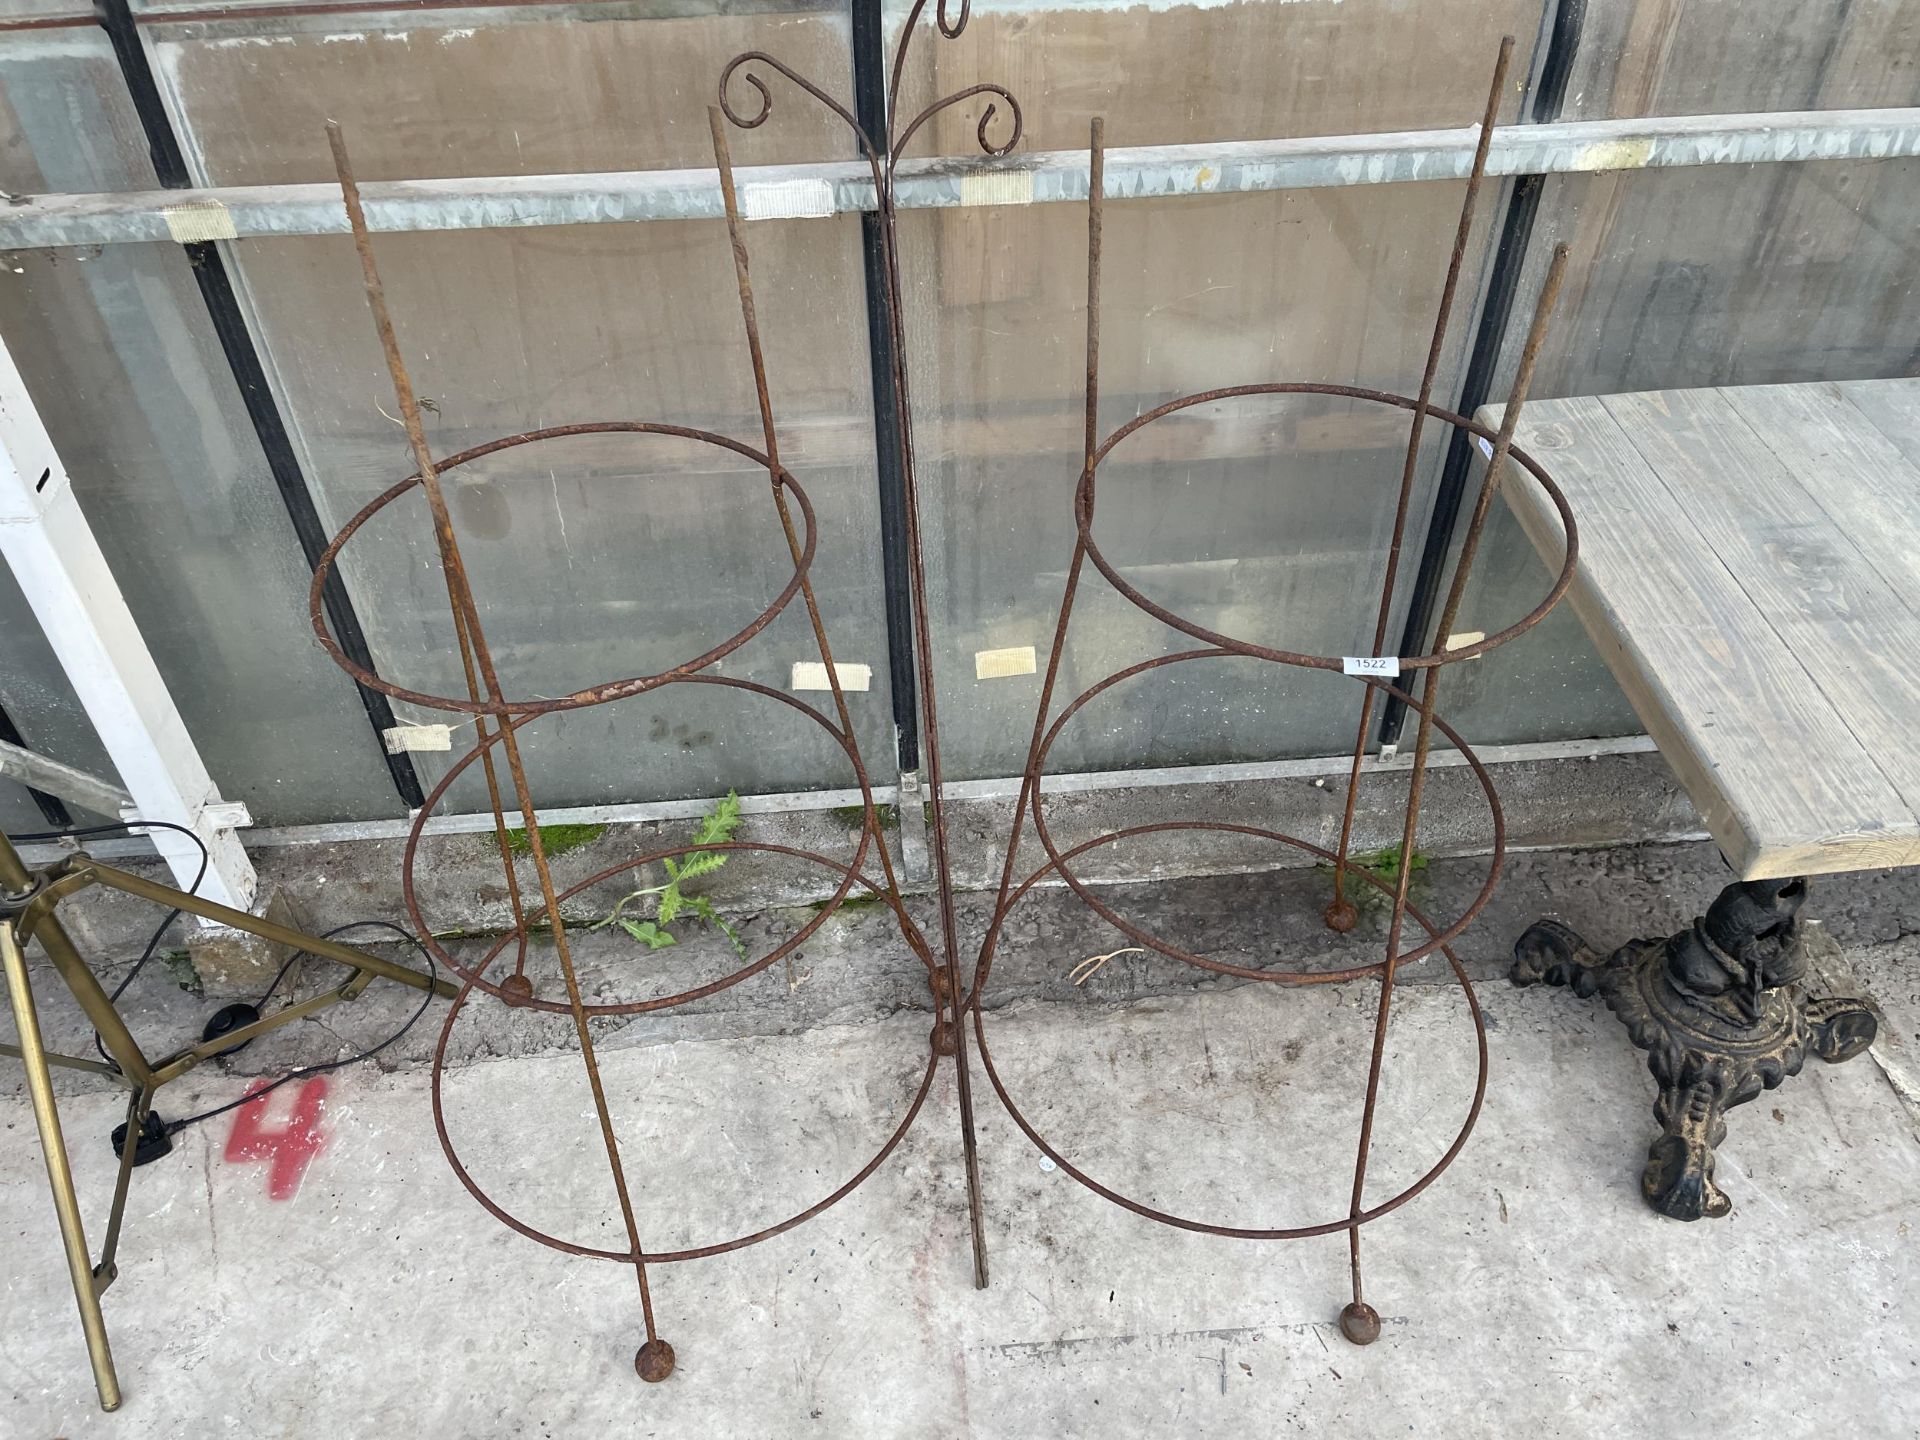 A PAIR OF STEEL PLANT CLIMBING FRAMES AND A STEEL BIRD FEEDER STAND